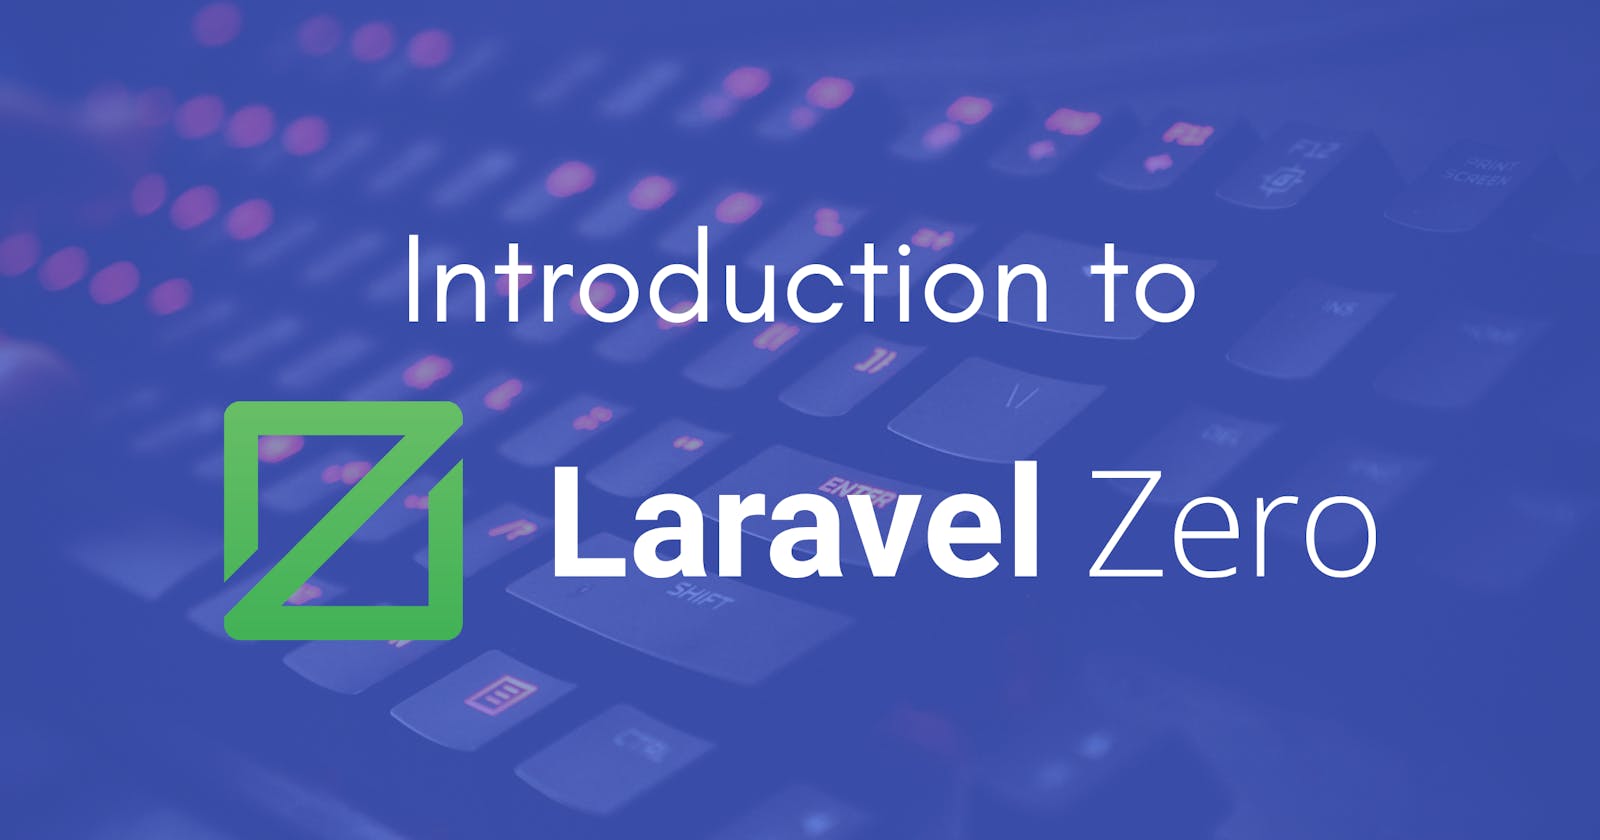 What is Laravel Zero and how to get started?